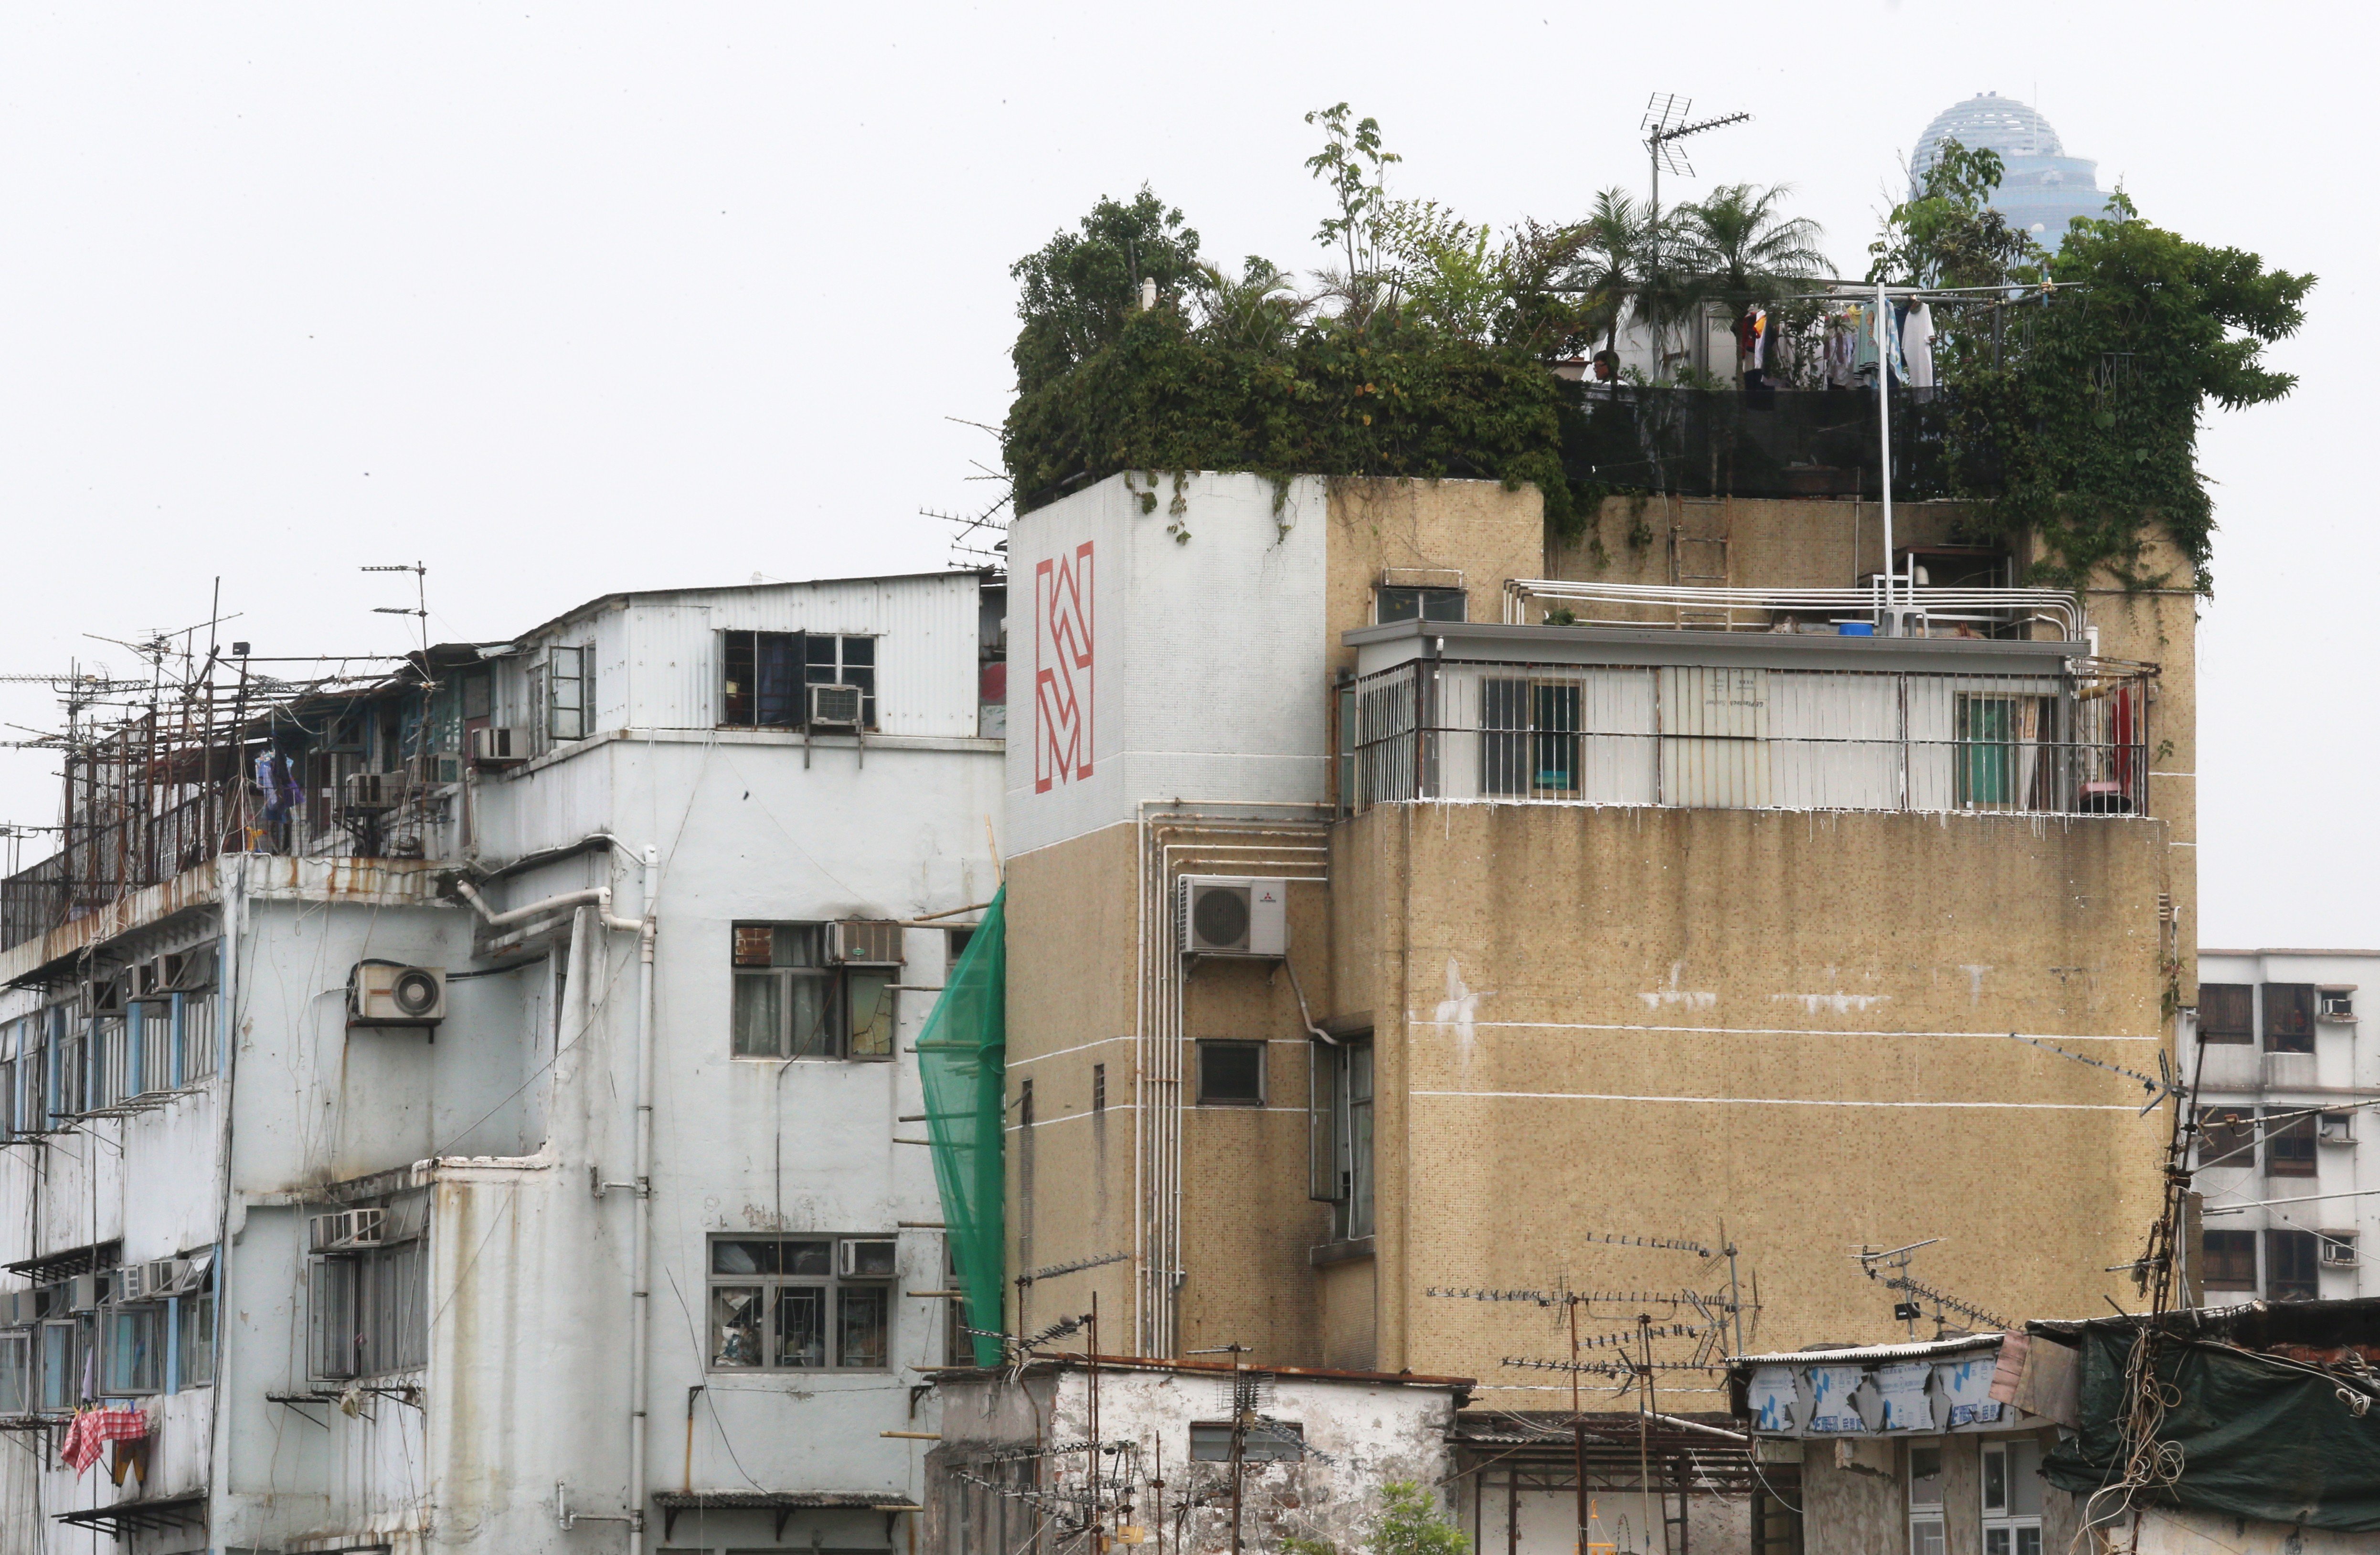 Illegal rooftop structures on a building in Sham Shui Po. Illegal structures are common in Hong Kong given the high cost of land. Photo: David Wong